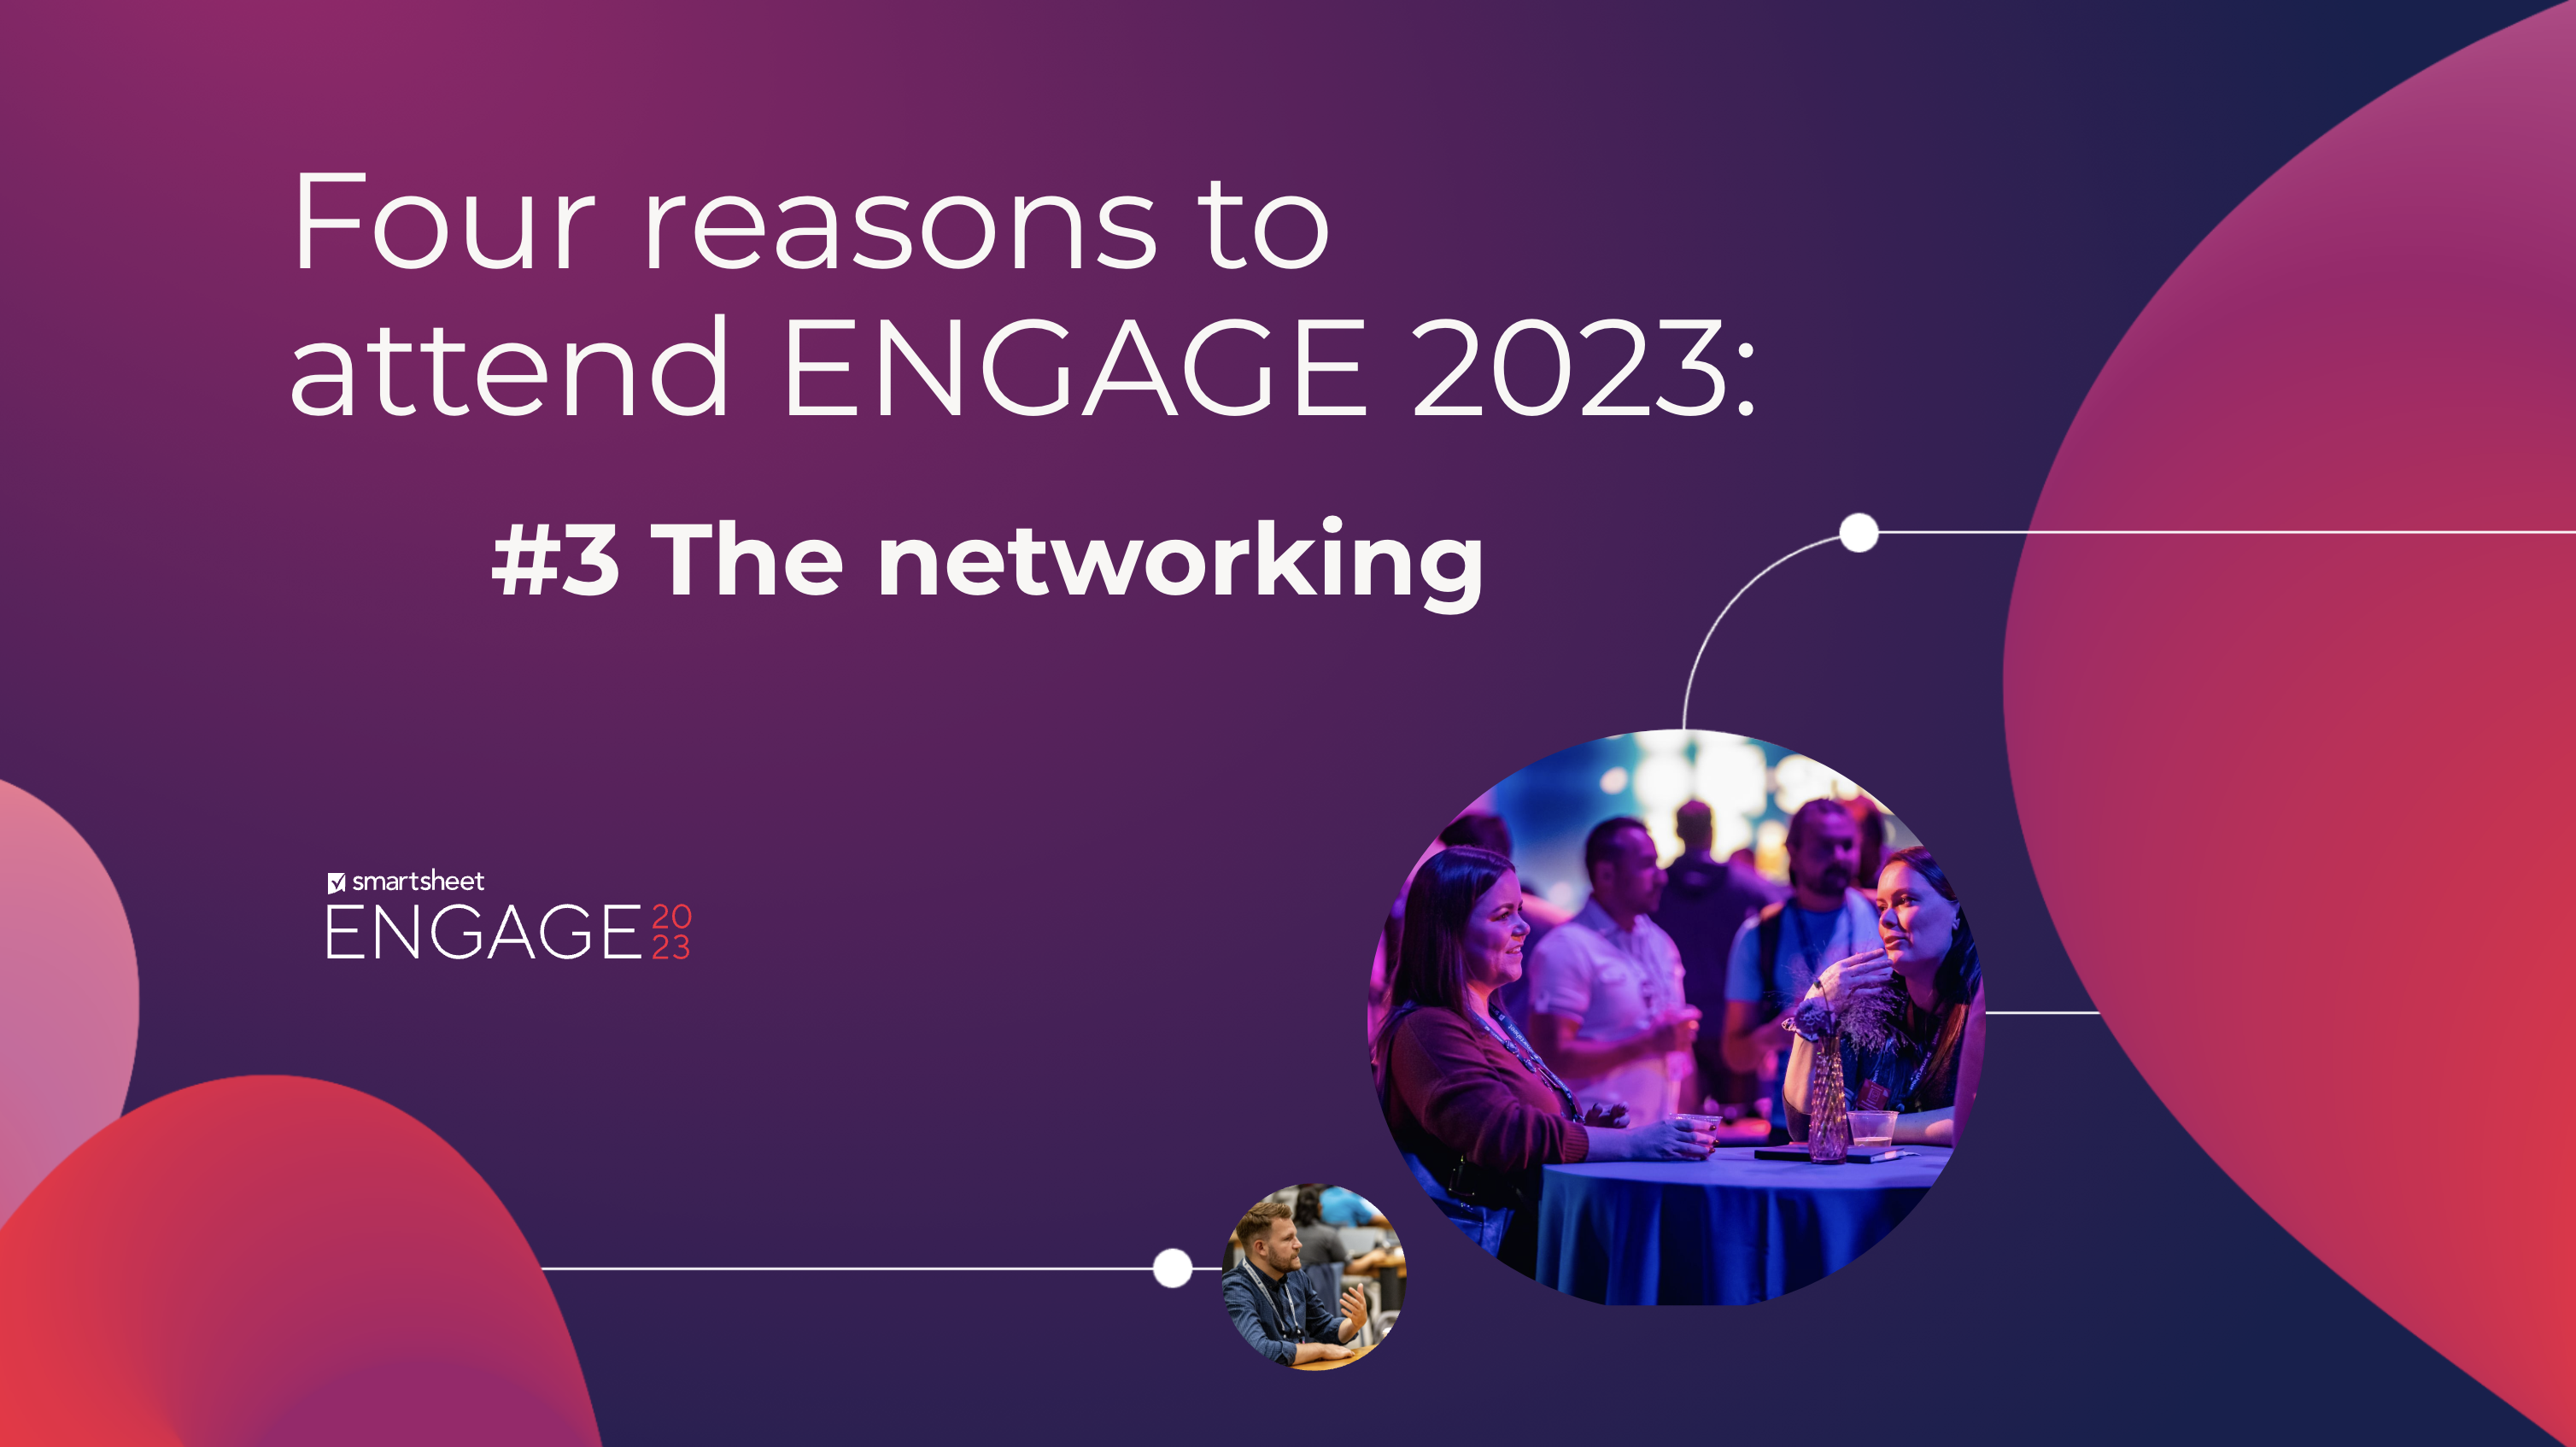 Reasons to attend ENGAGE 2023: The networking